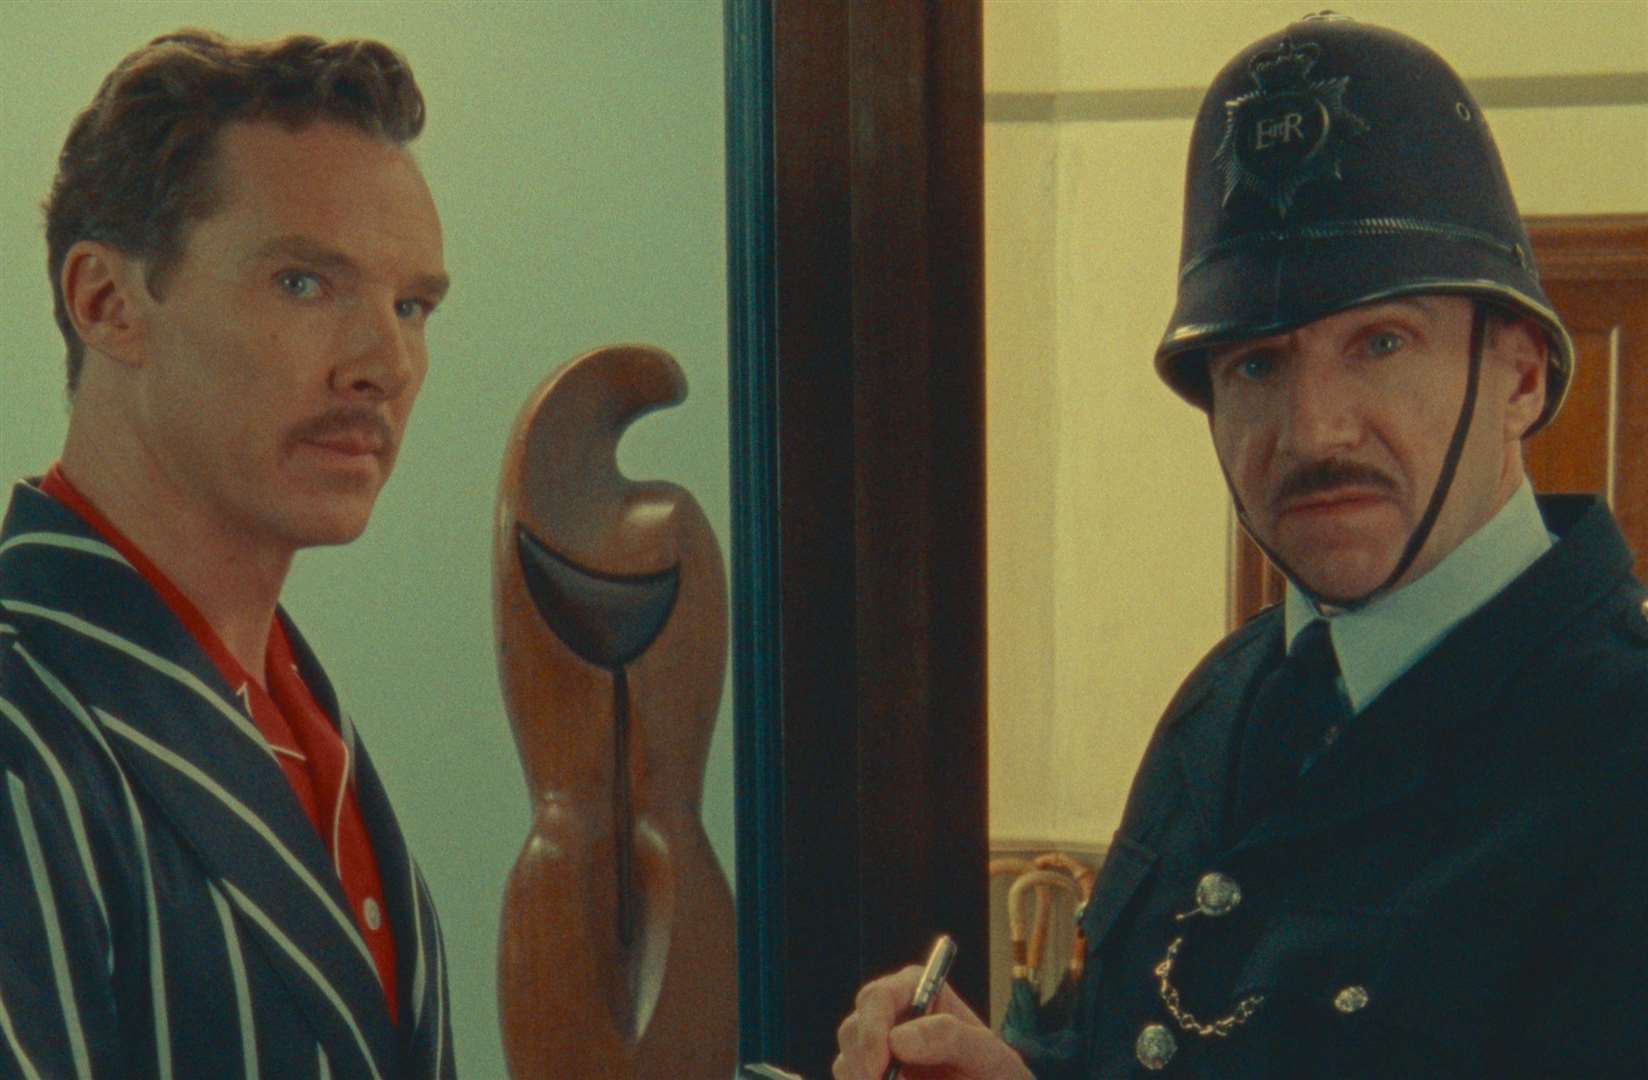 The Wonderful Story Of Henry Sugar. Pictured: Benedict Cumberbatch as Henry Sugar and Ralph Fiennes as the policeman.Picture credit should read: Netflix.